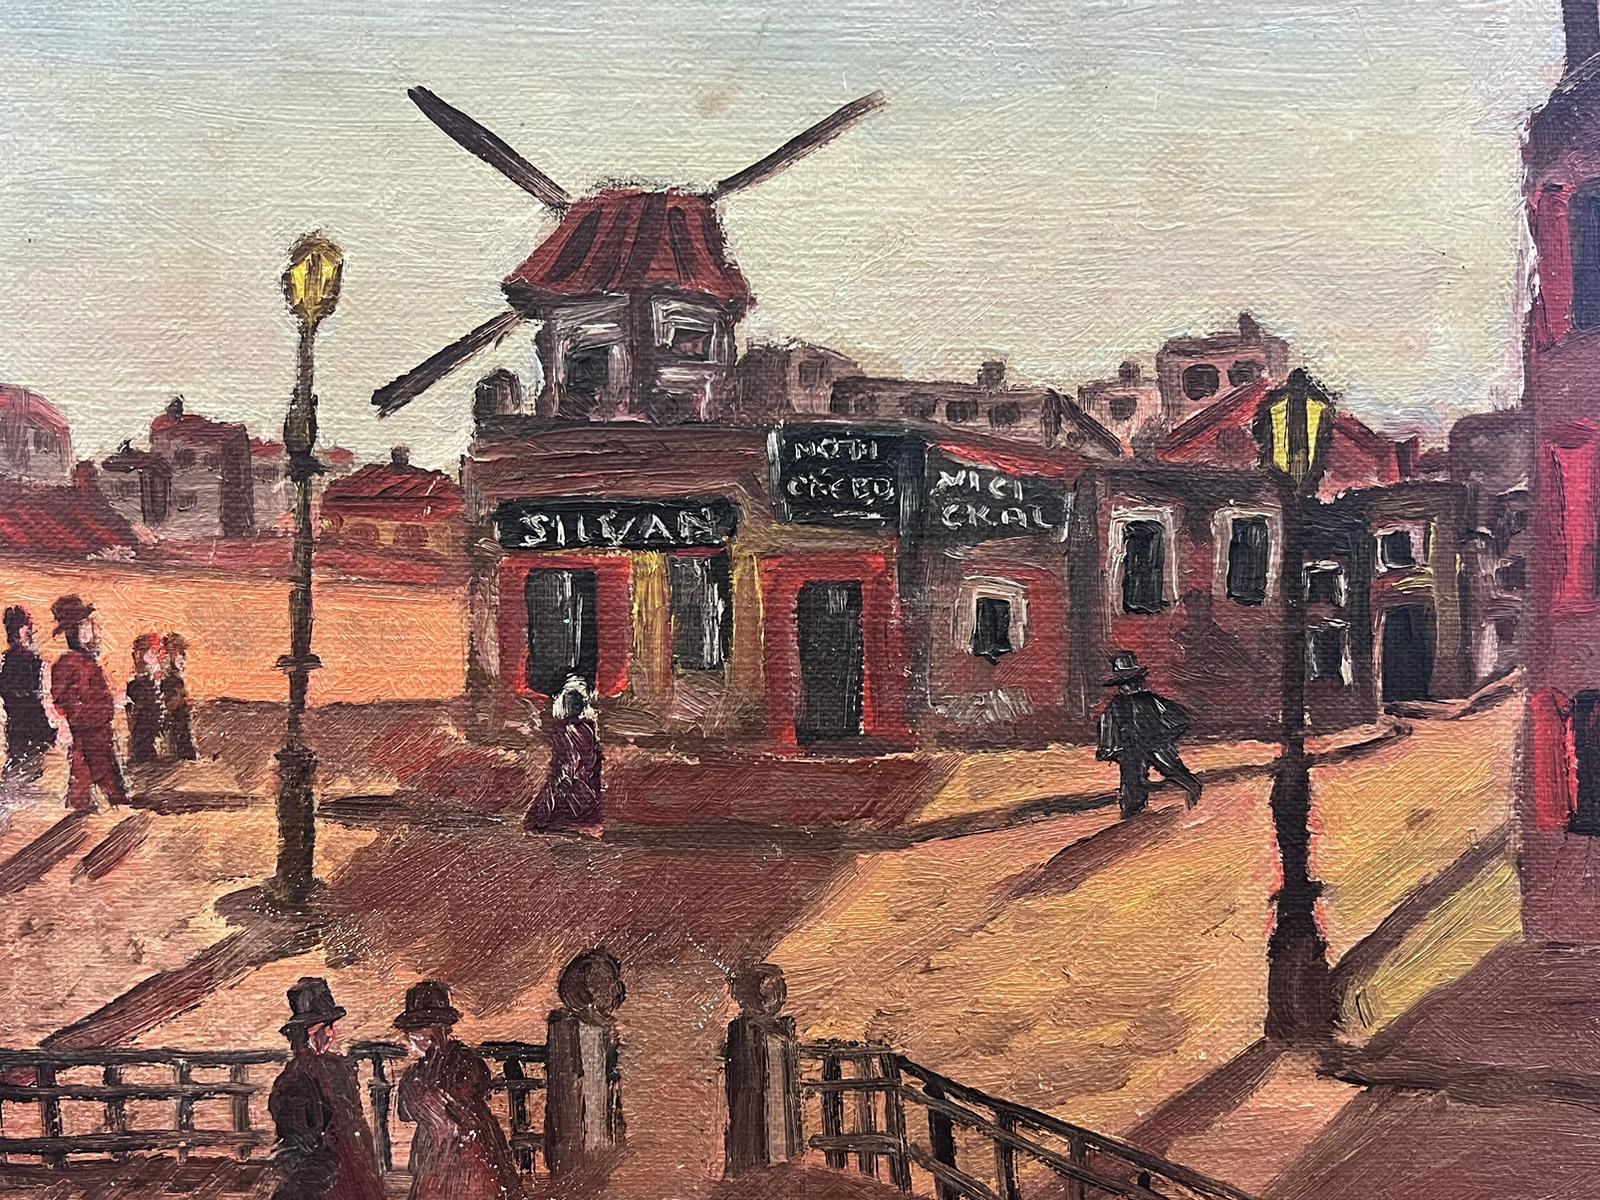 Le Moulin
French School, early 20th century
signed oil on board unframed
board: 10 x 13.5 inches
provenance: private collection, France
condition: good and sound condition